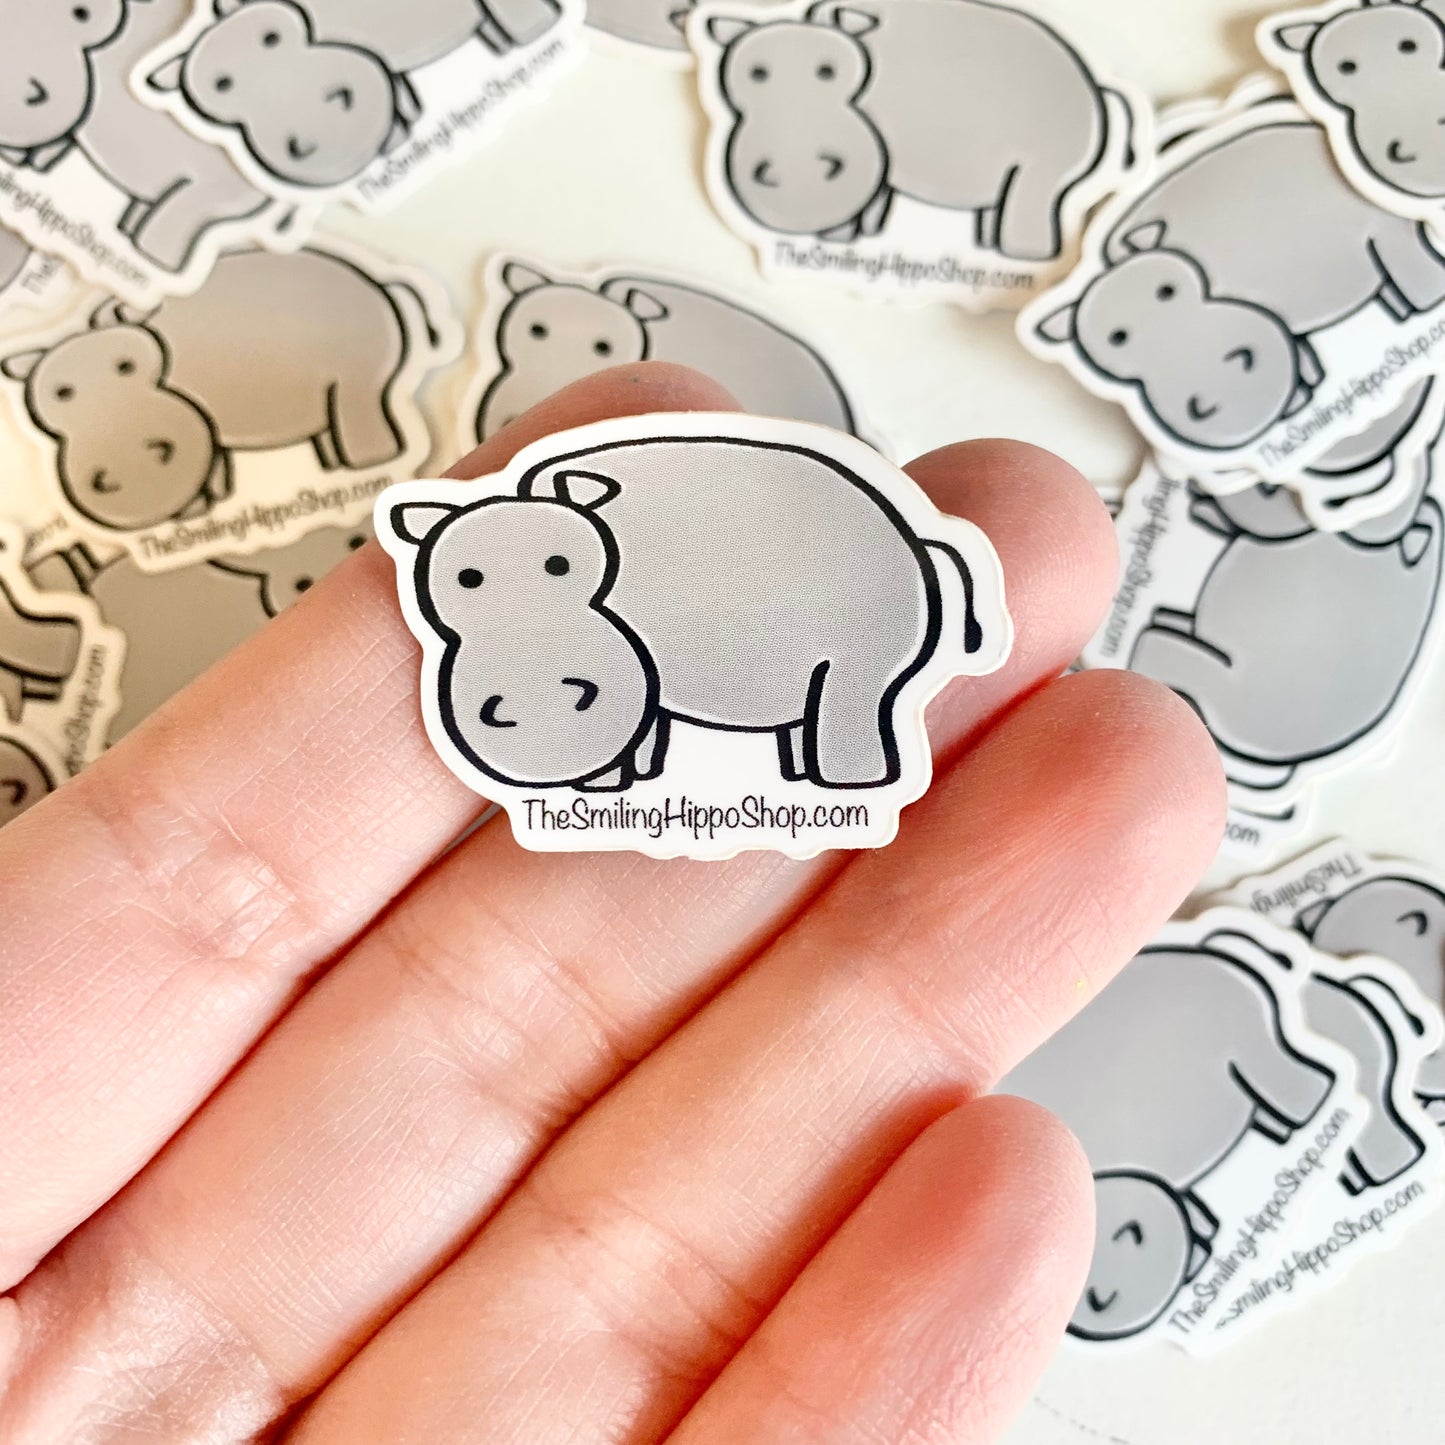 The Smiling Hippo 1x1.5in sticker